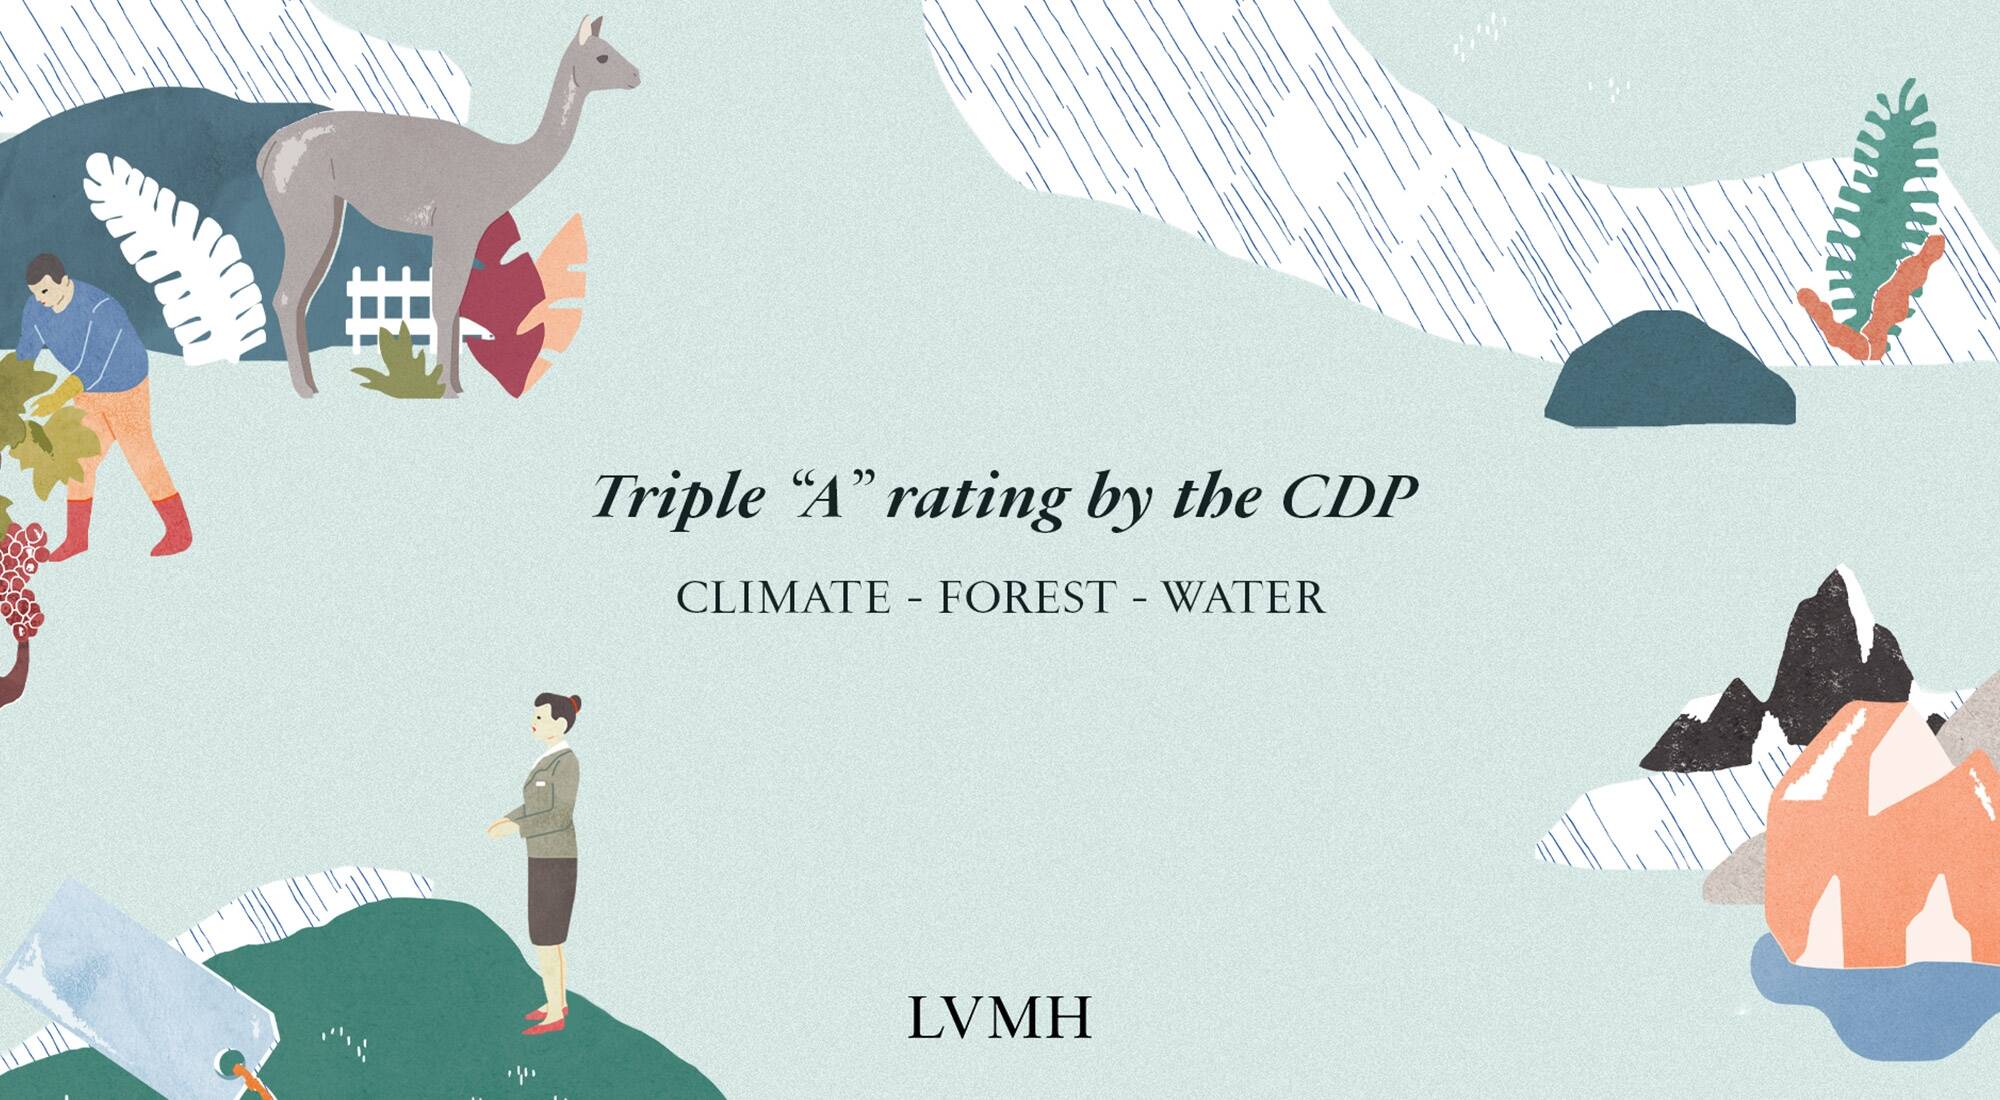 LVMH is awarded the prestigious triple “A” rating by the CDP for